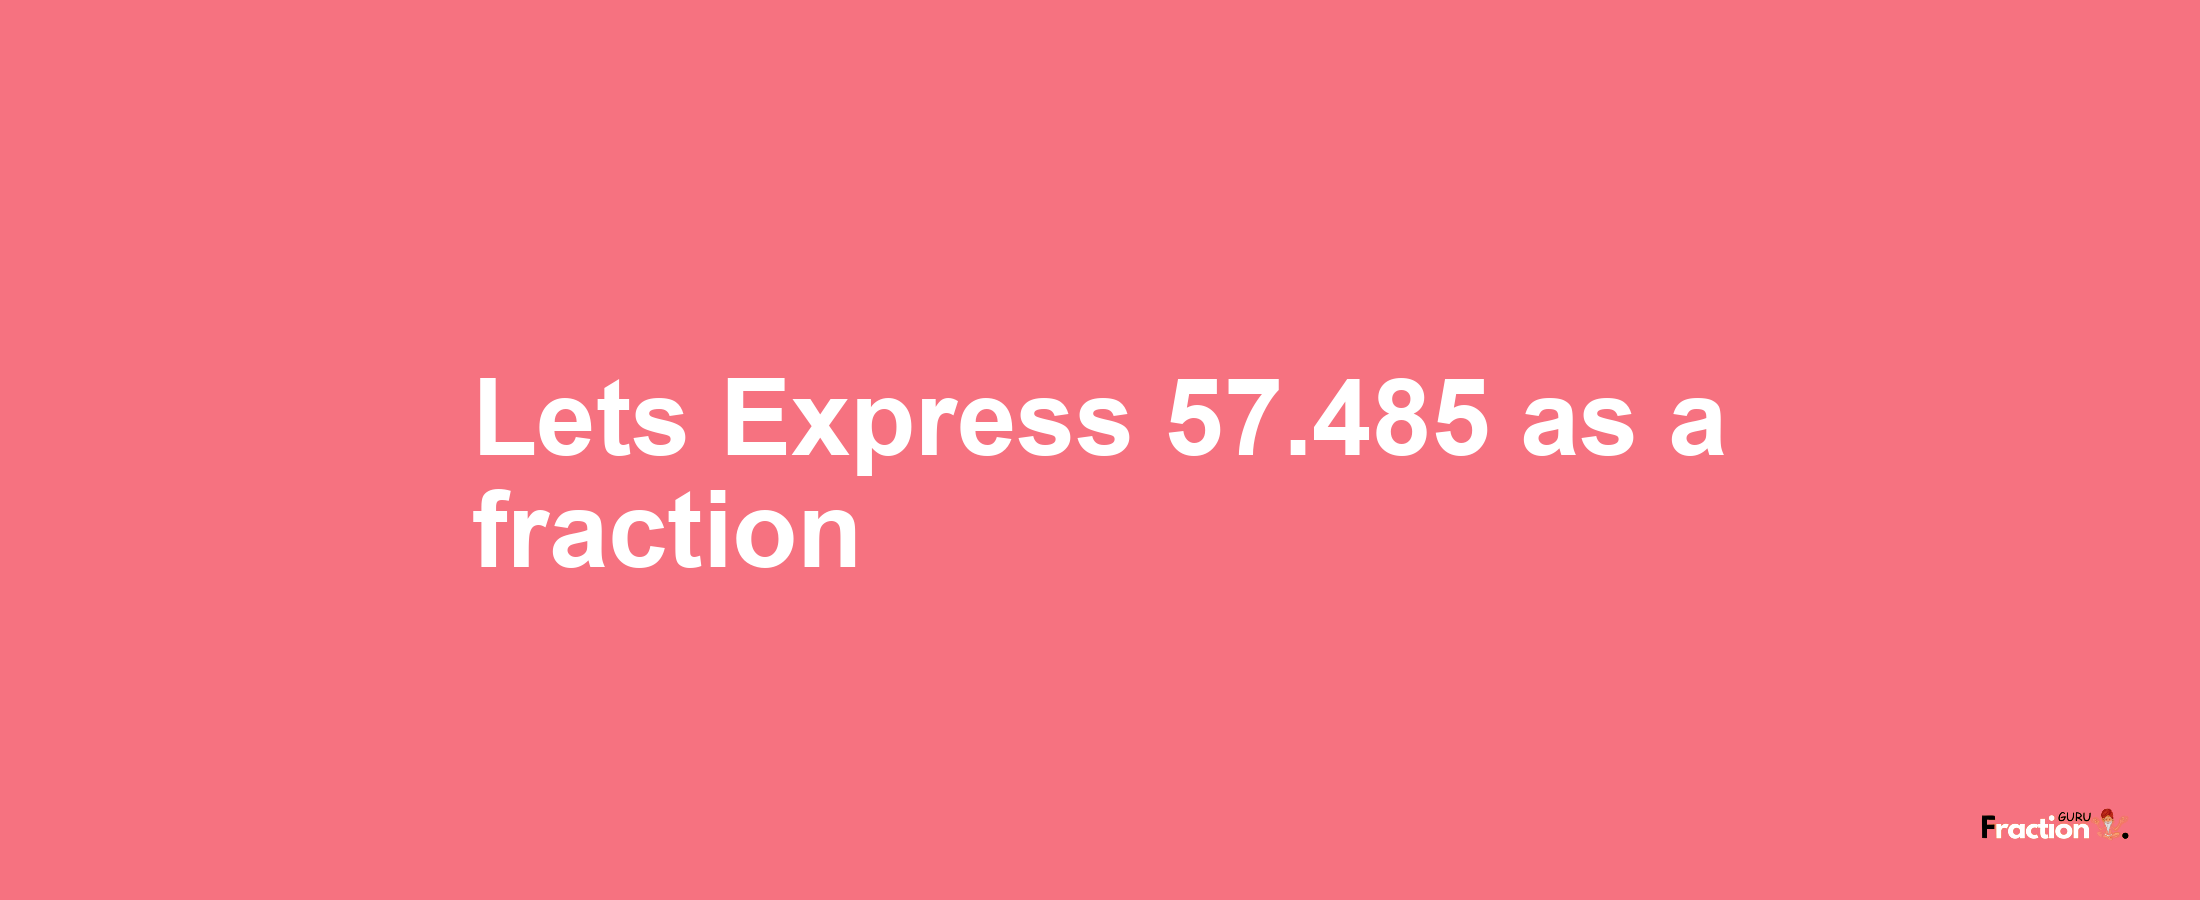 Lets Express 57.485 as afraction